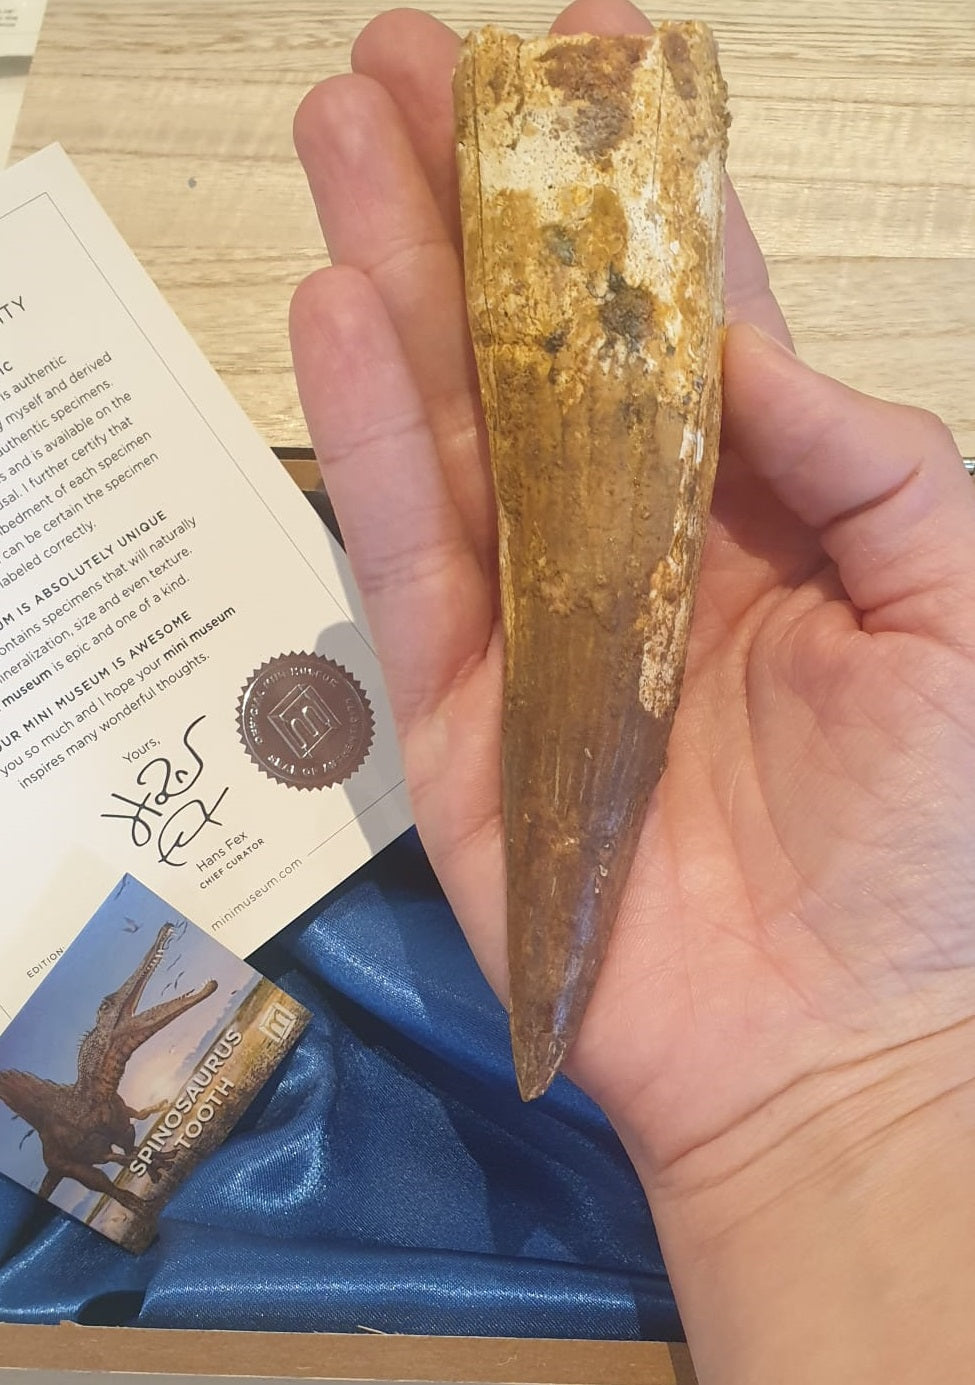 EXTRA LARGE and amazingly preserved 15cm Spinosaurus (Dinosaur) Tooth (widest part 3.5cm!) - Crown and Root! RARE!